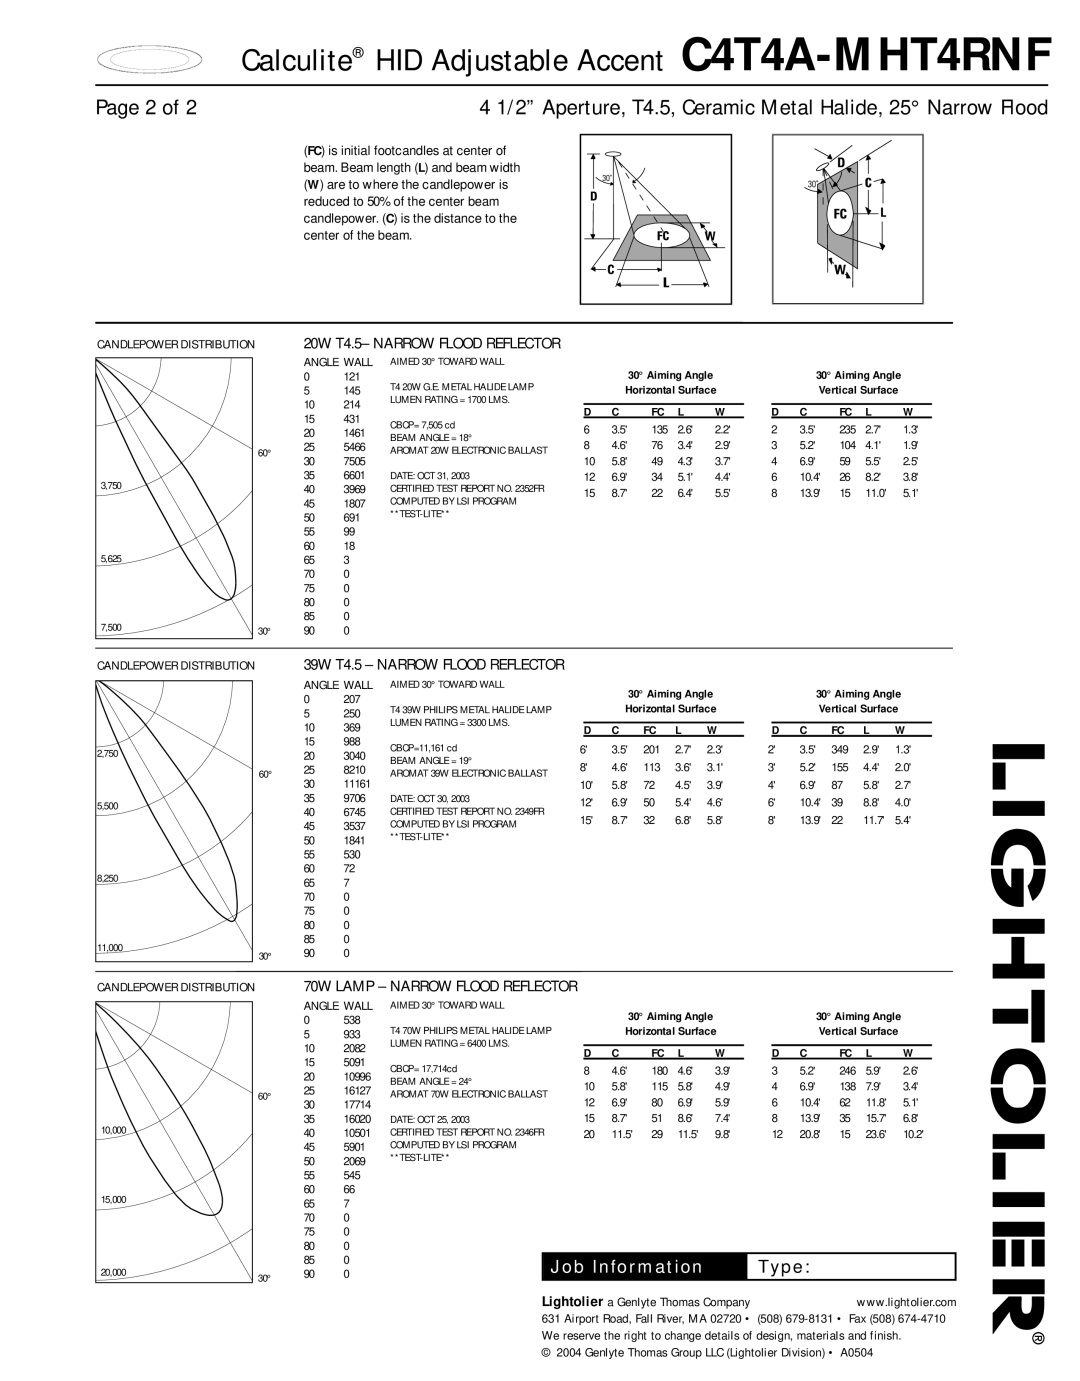 Lightolier none manual Page 2 of, Calculite HID Adjustable Accent C4T4A-MHT4RNF, Job Information, Type 